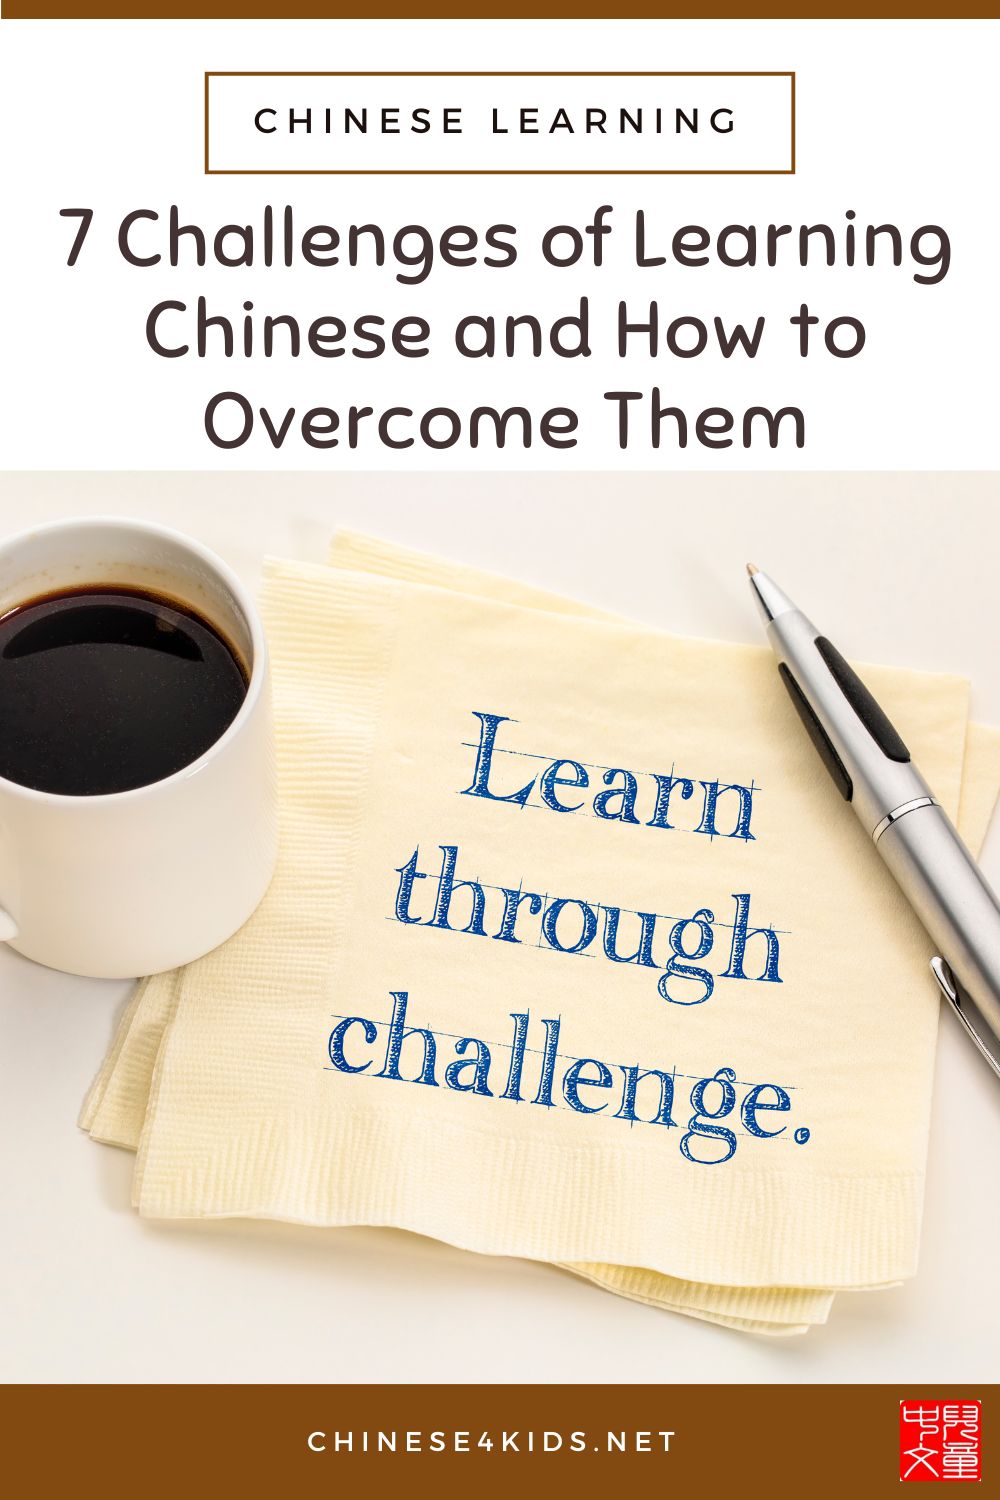 7 challenges of learning Chinese and how to overcome them.